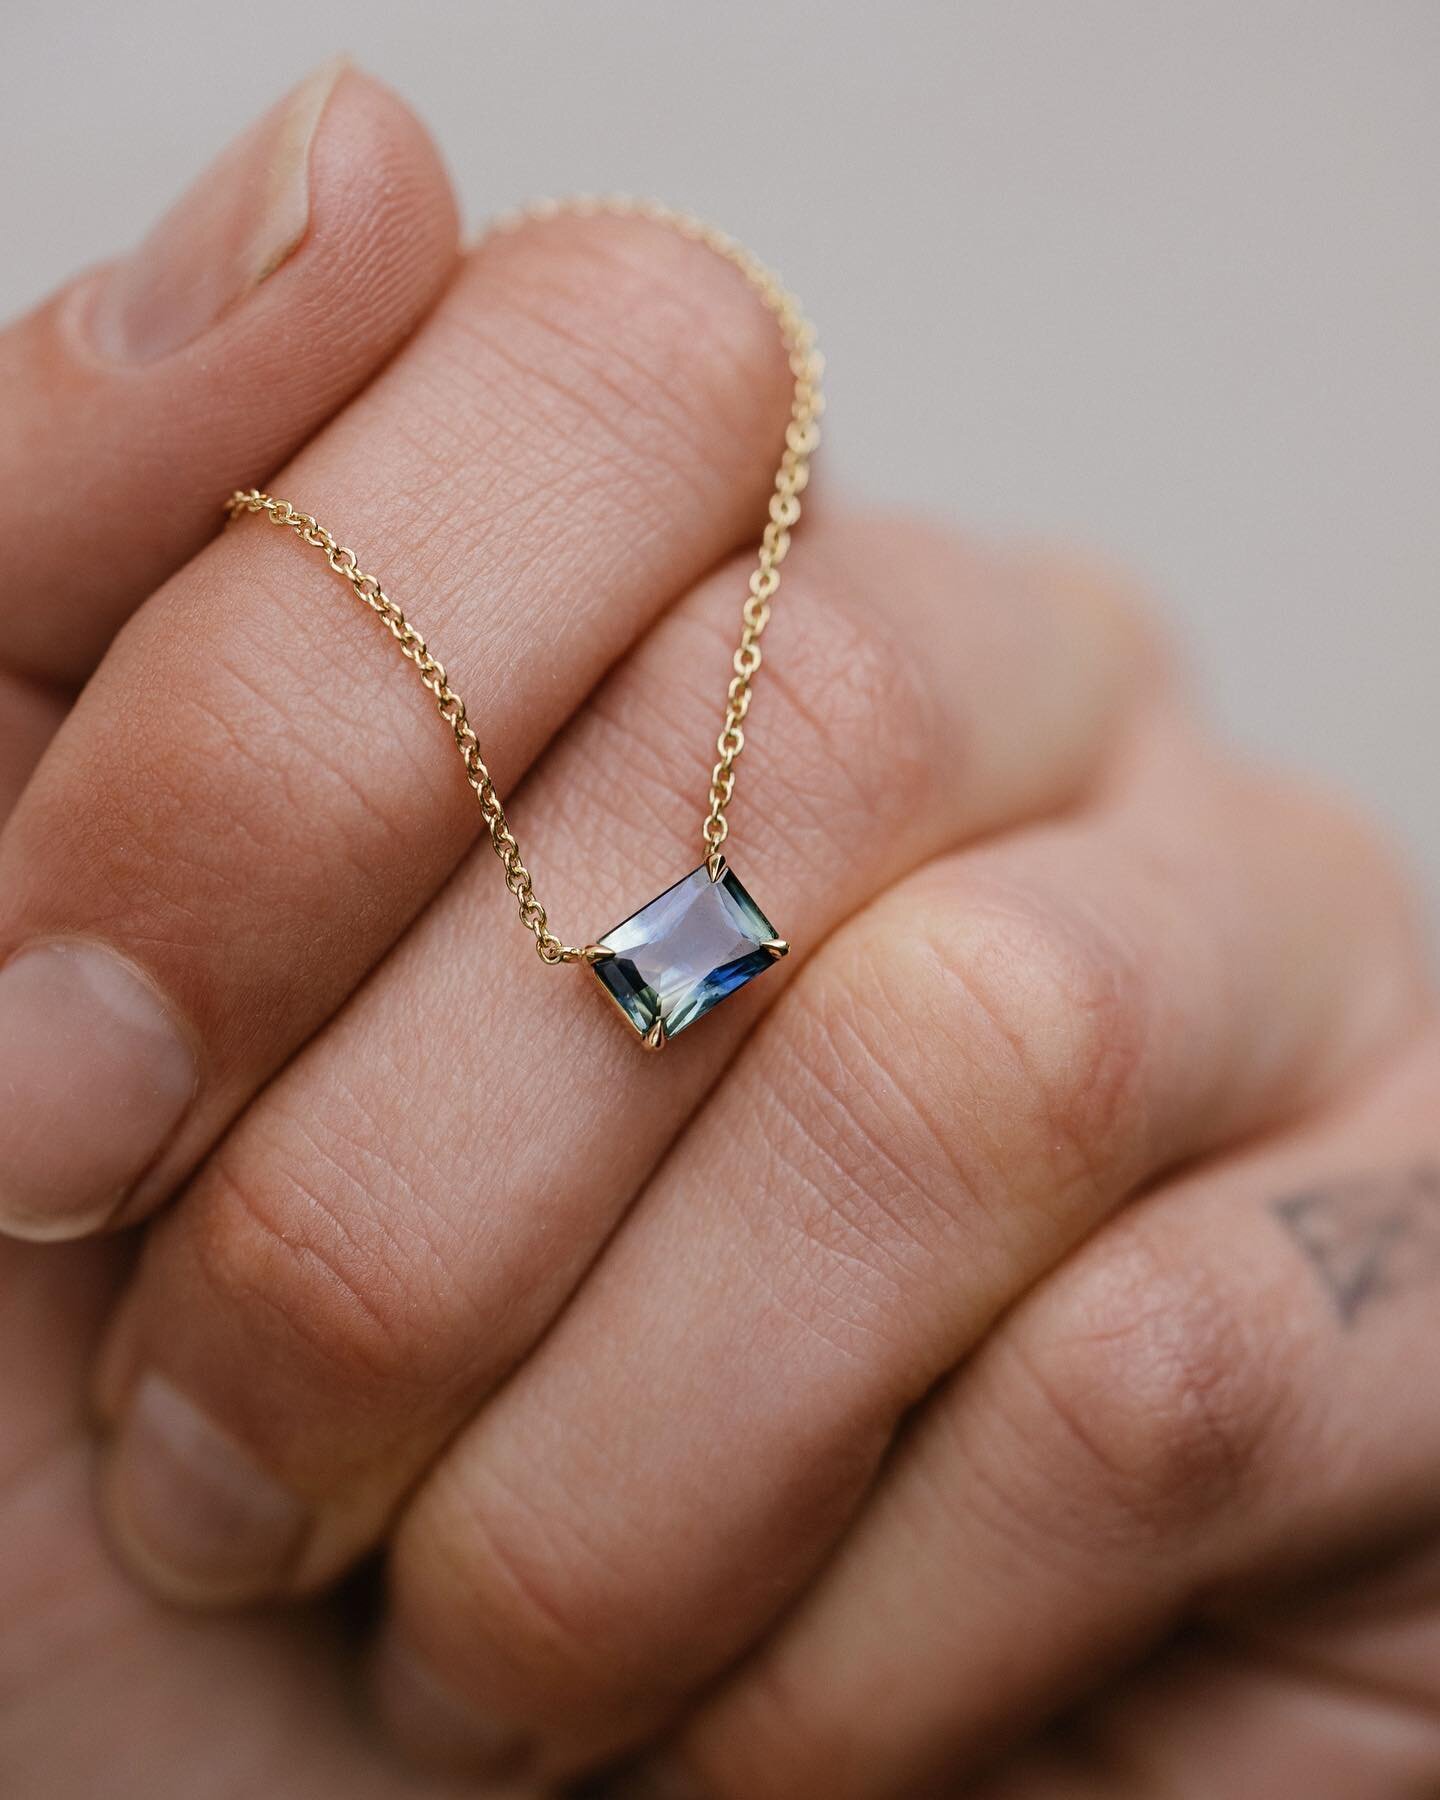 We&rsquo;re so excited to be able to bring you some extra special treasures just in time for Christmas. This radiant cut, parti sapphire is a current favourite of ours, and will be available today from 3pm (AEDT).
⠀⠀⠀⠀⠀⠀⠀⠀⠀
As part of our ready to sh